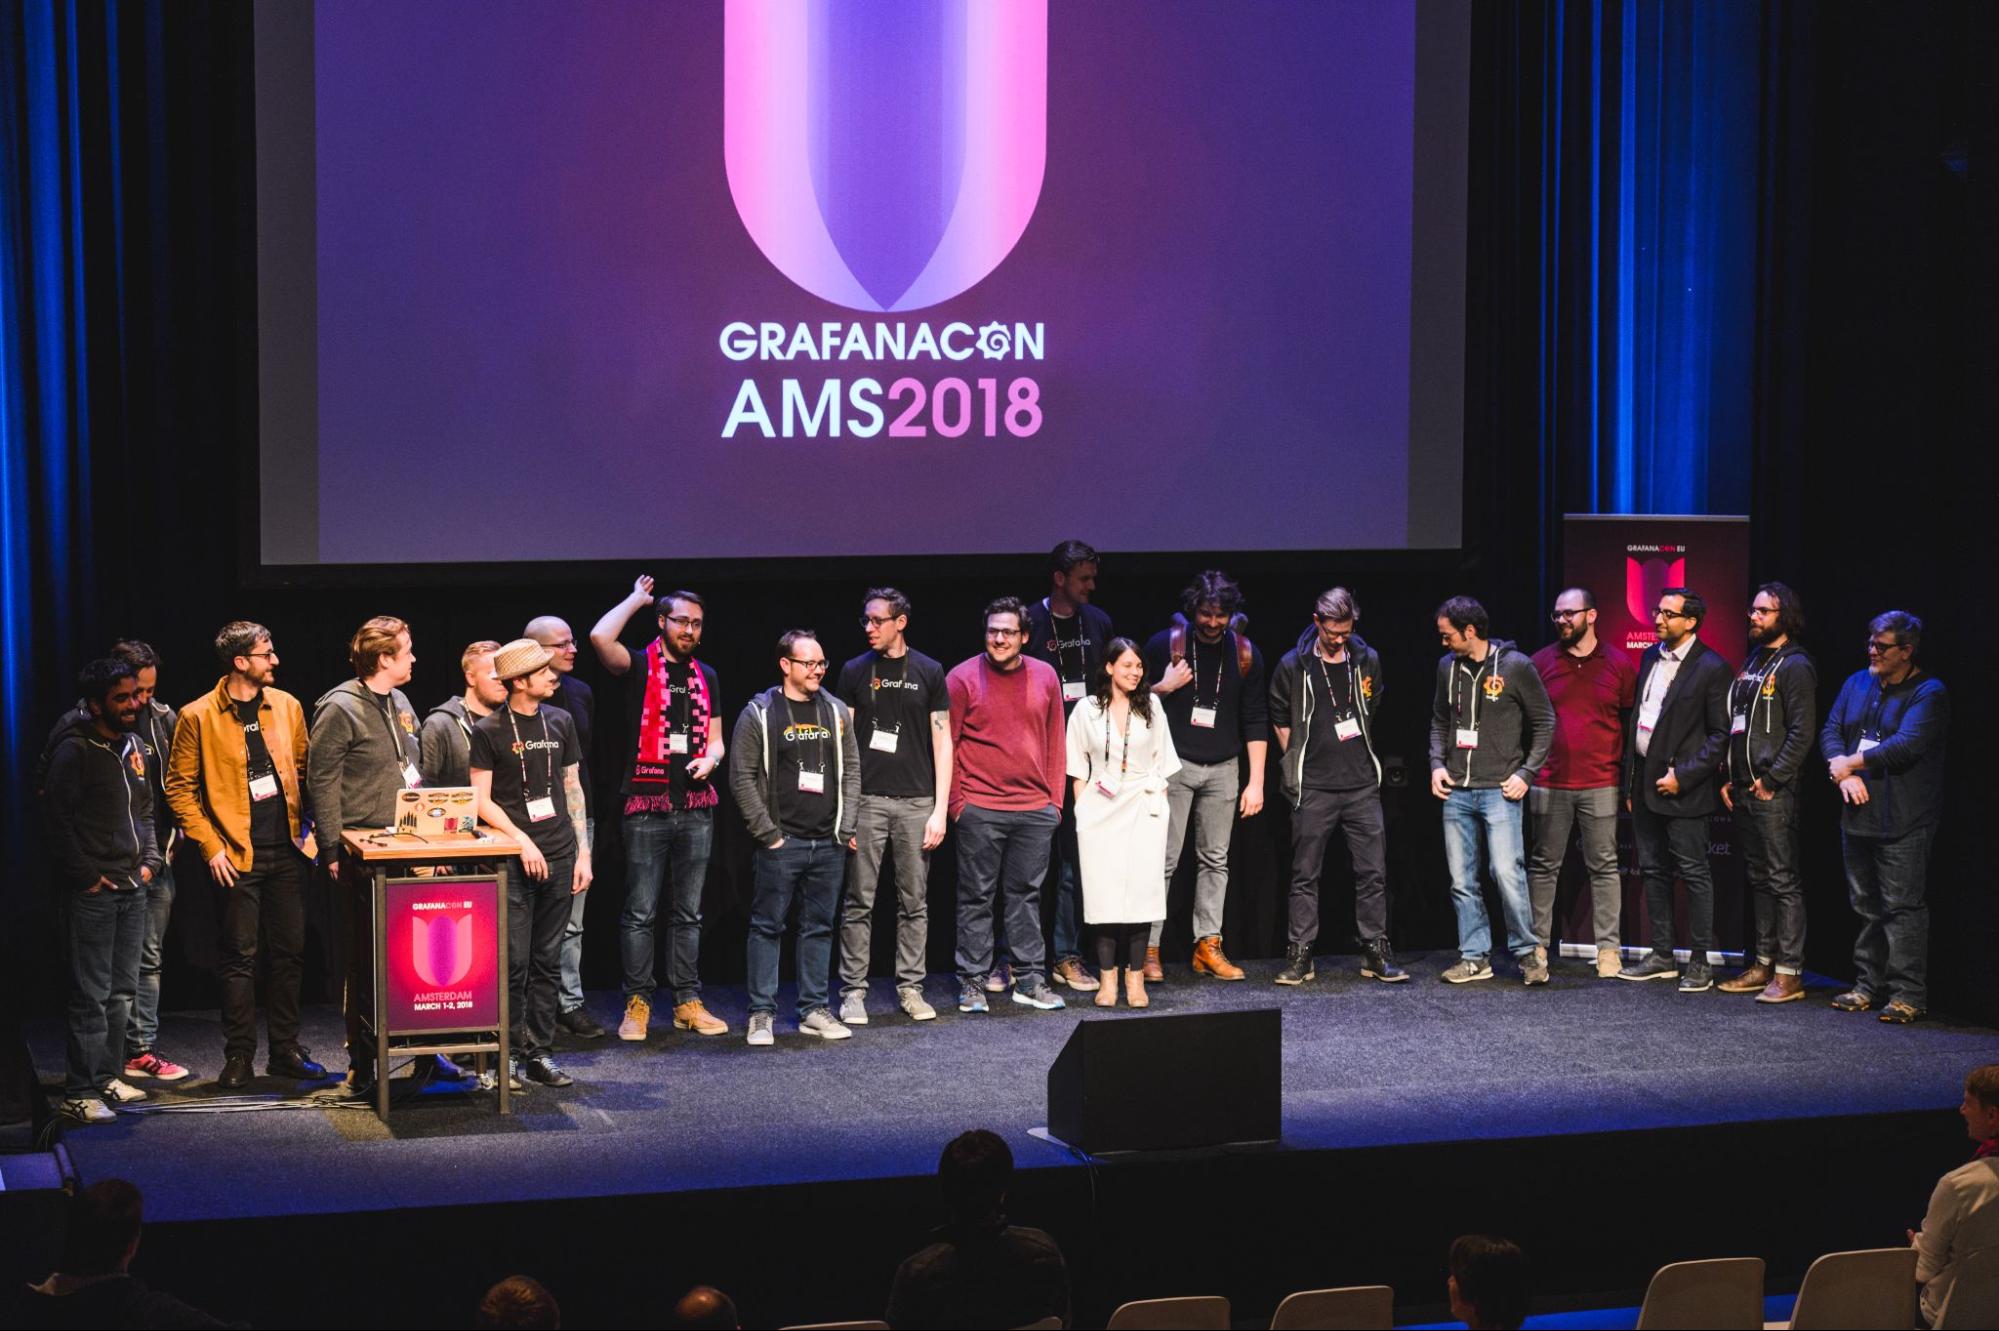 Photo of Grafana Labs team on stage at GrafanaCON 2018 in Amsterdam.